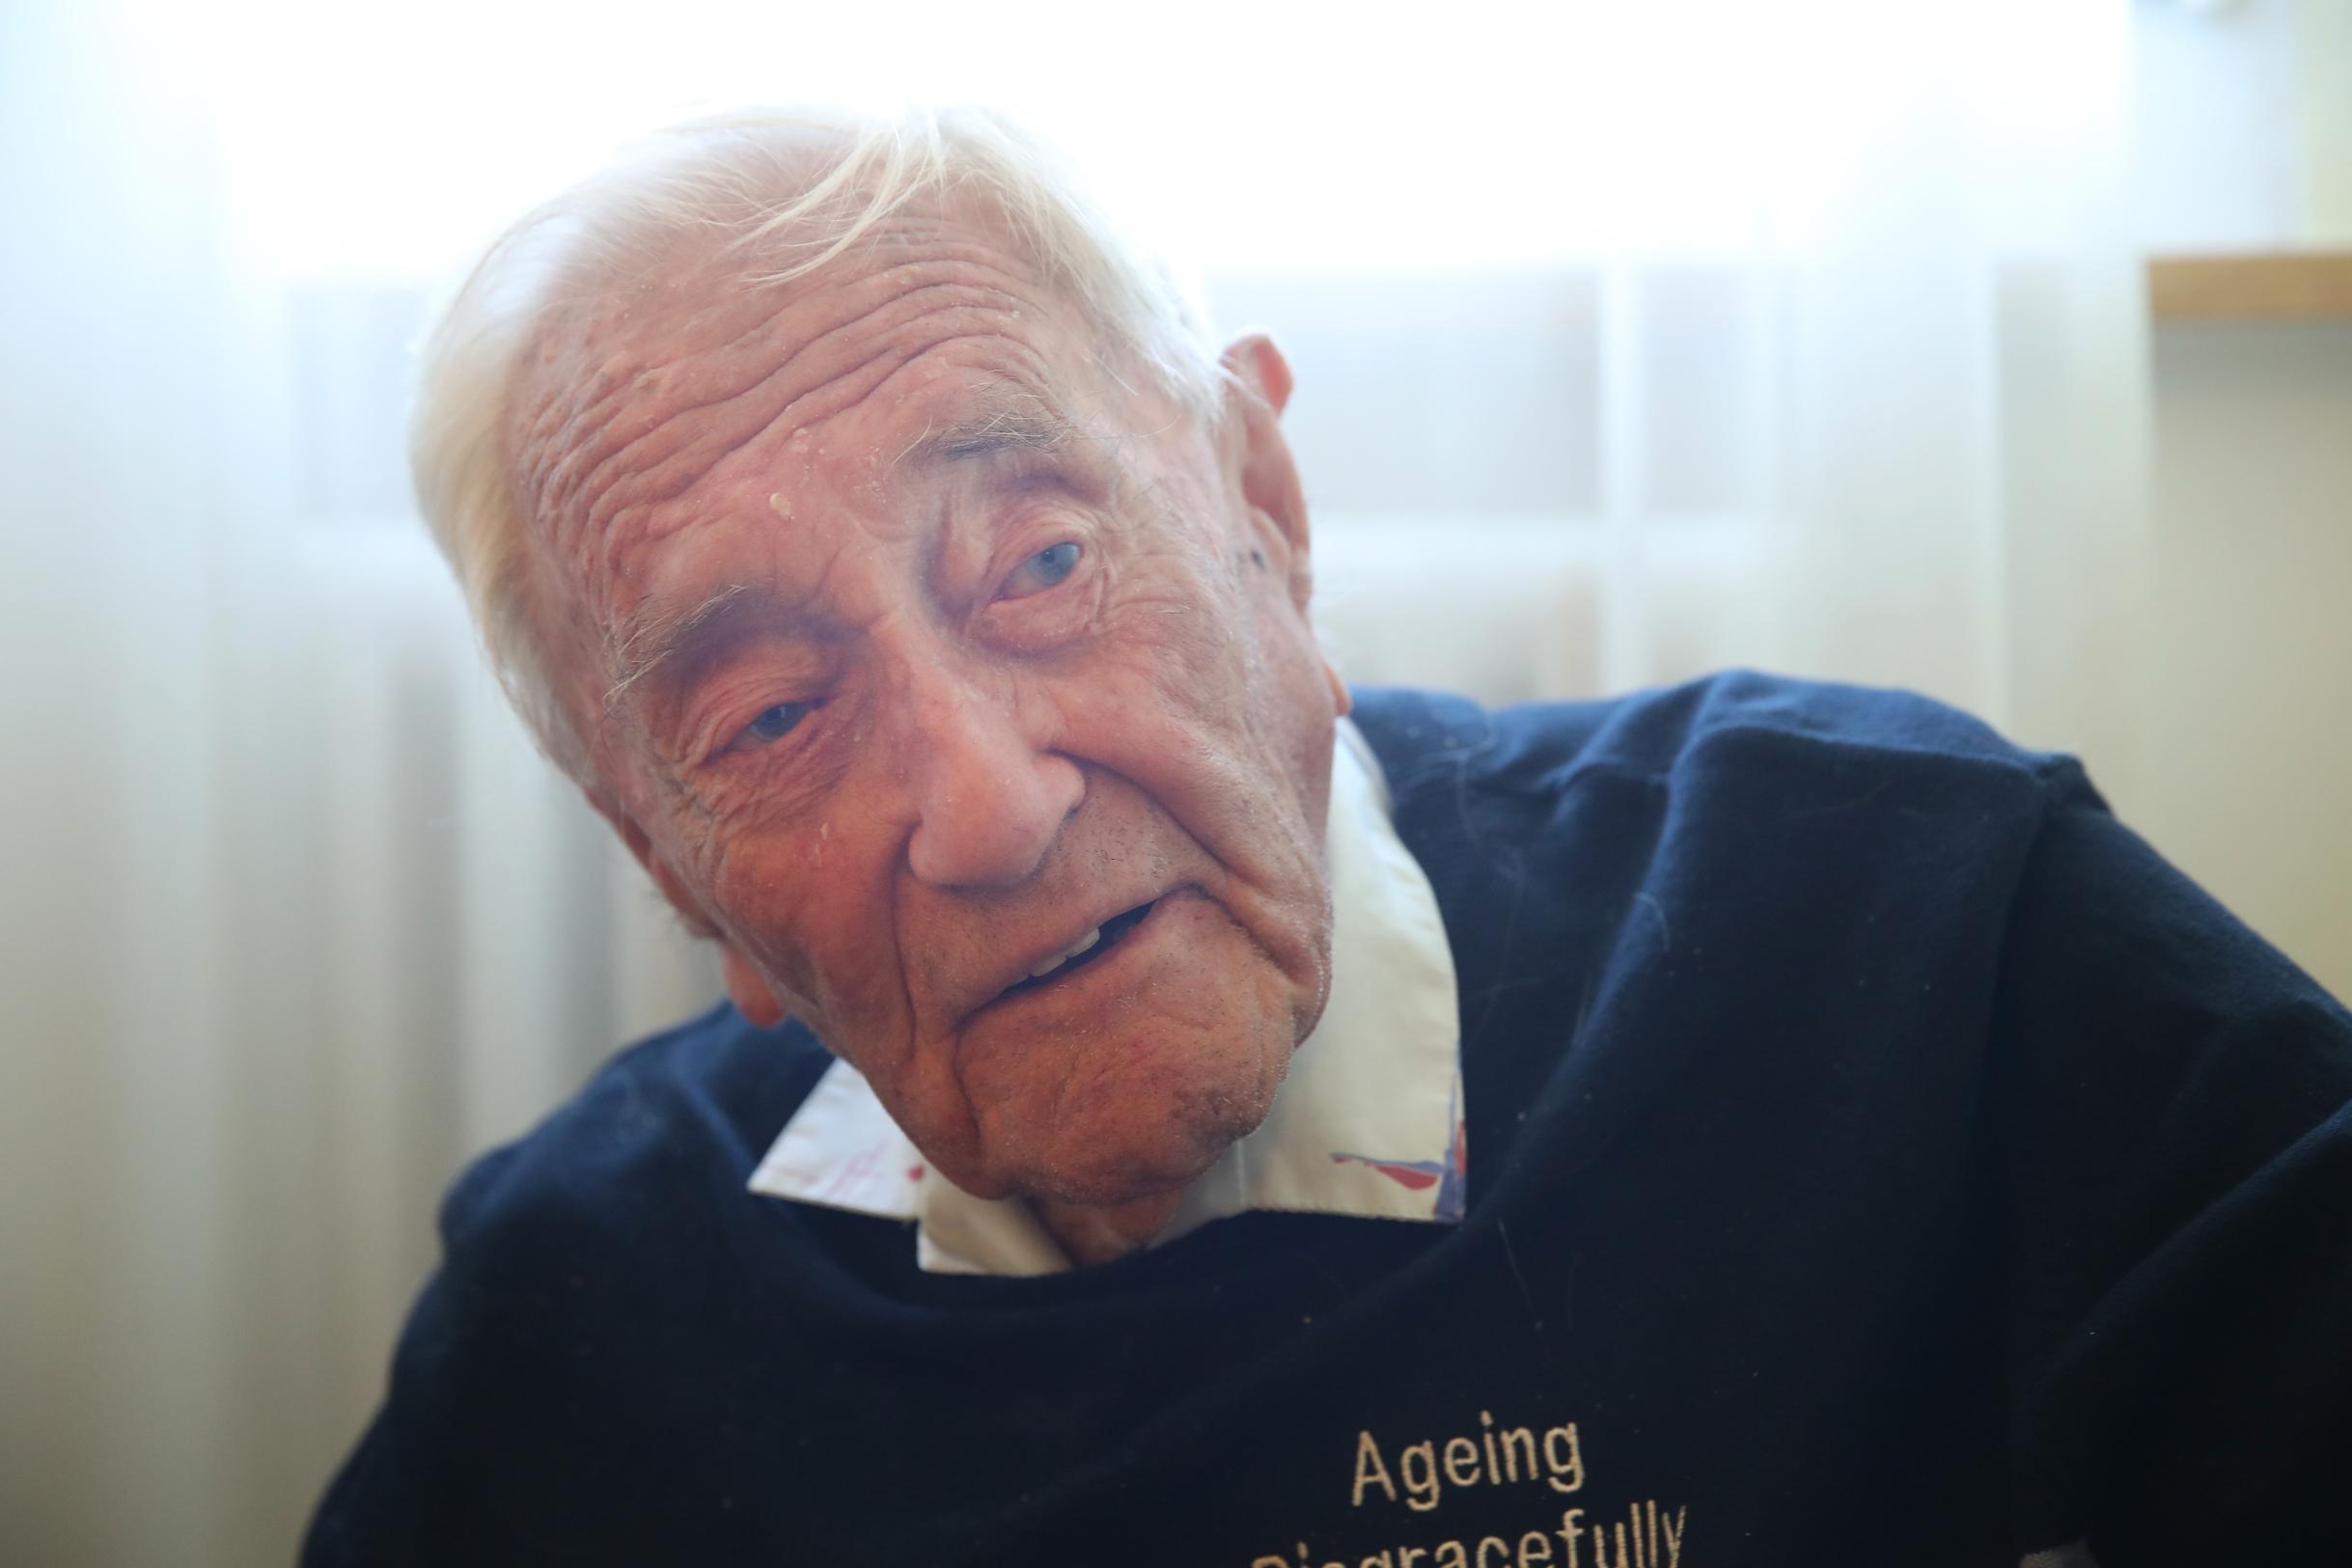 David Goodall, 104-year-old scientist, takes own life at clinic | CNN